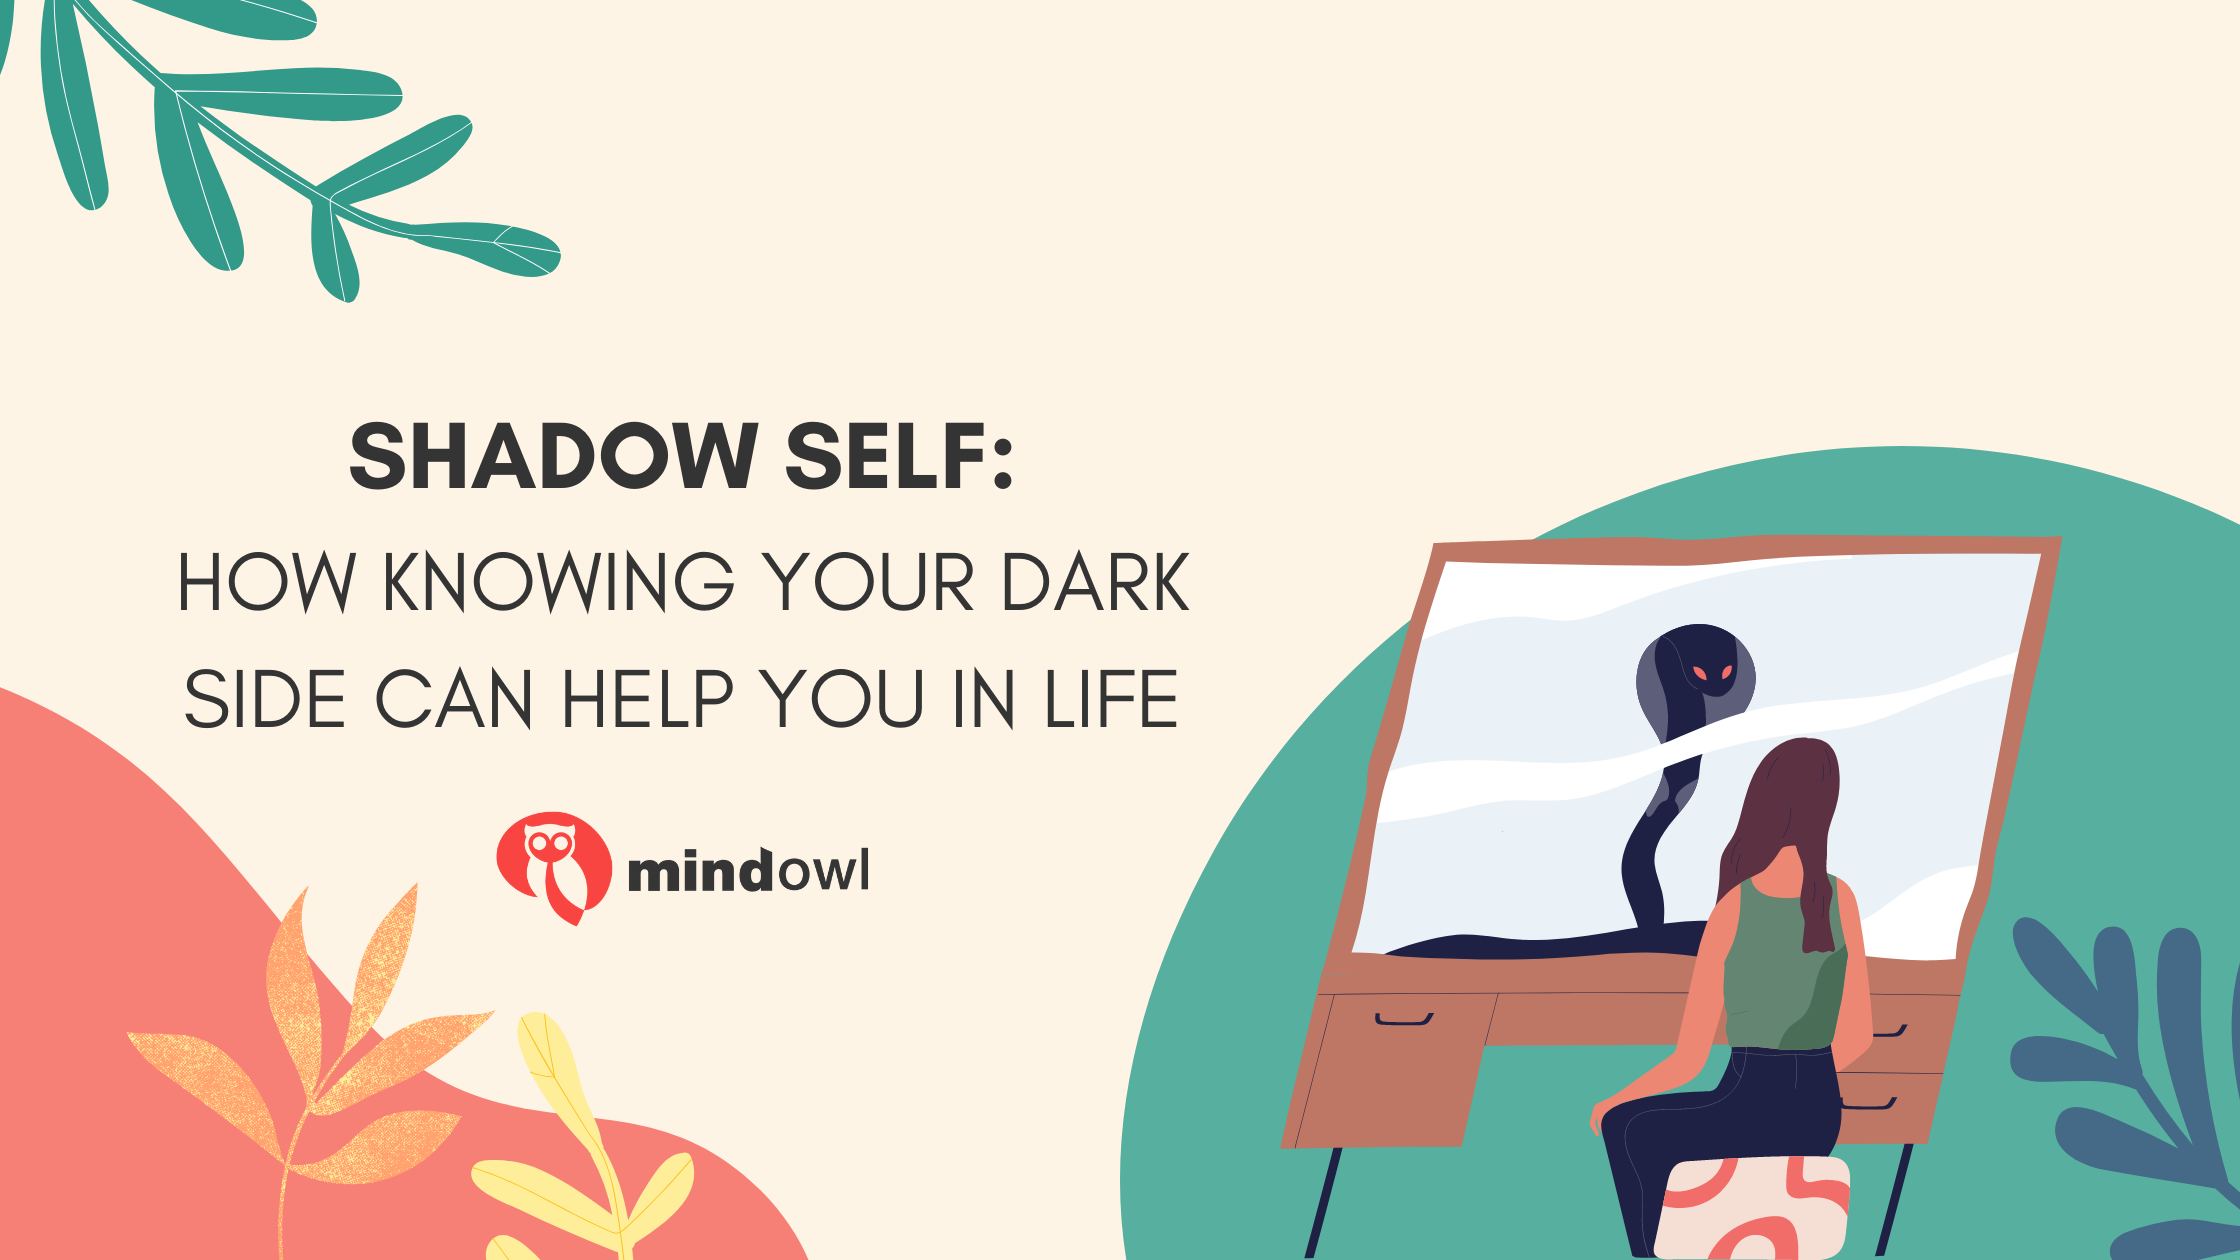 Shadow self: how knowing your dark side can help you in life